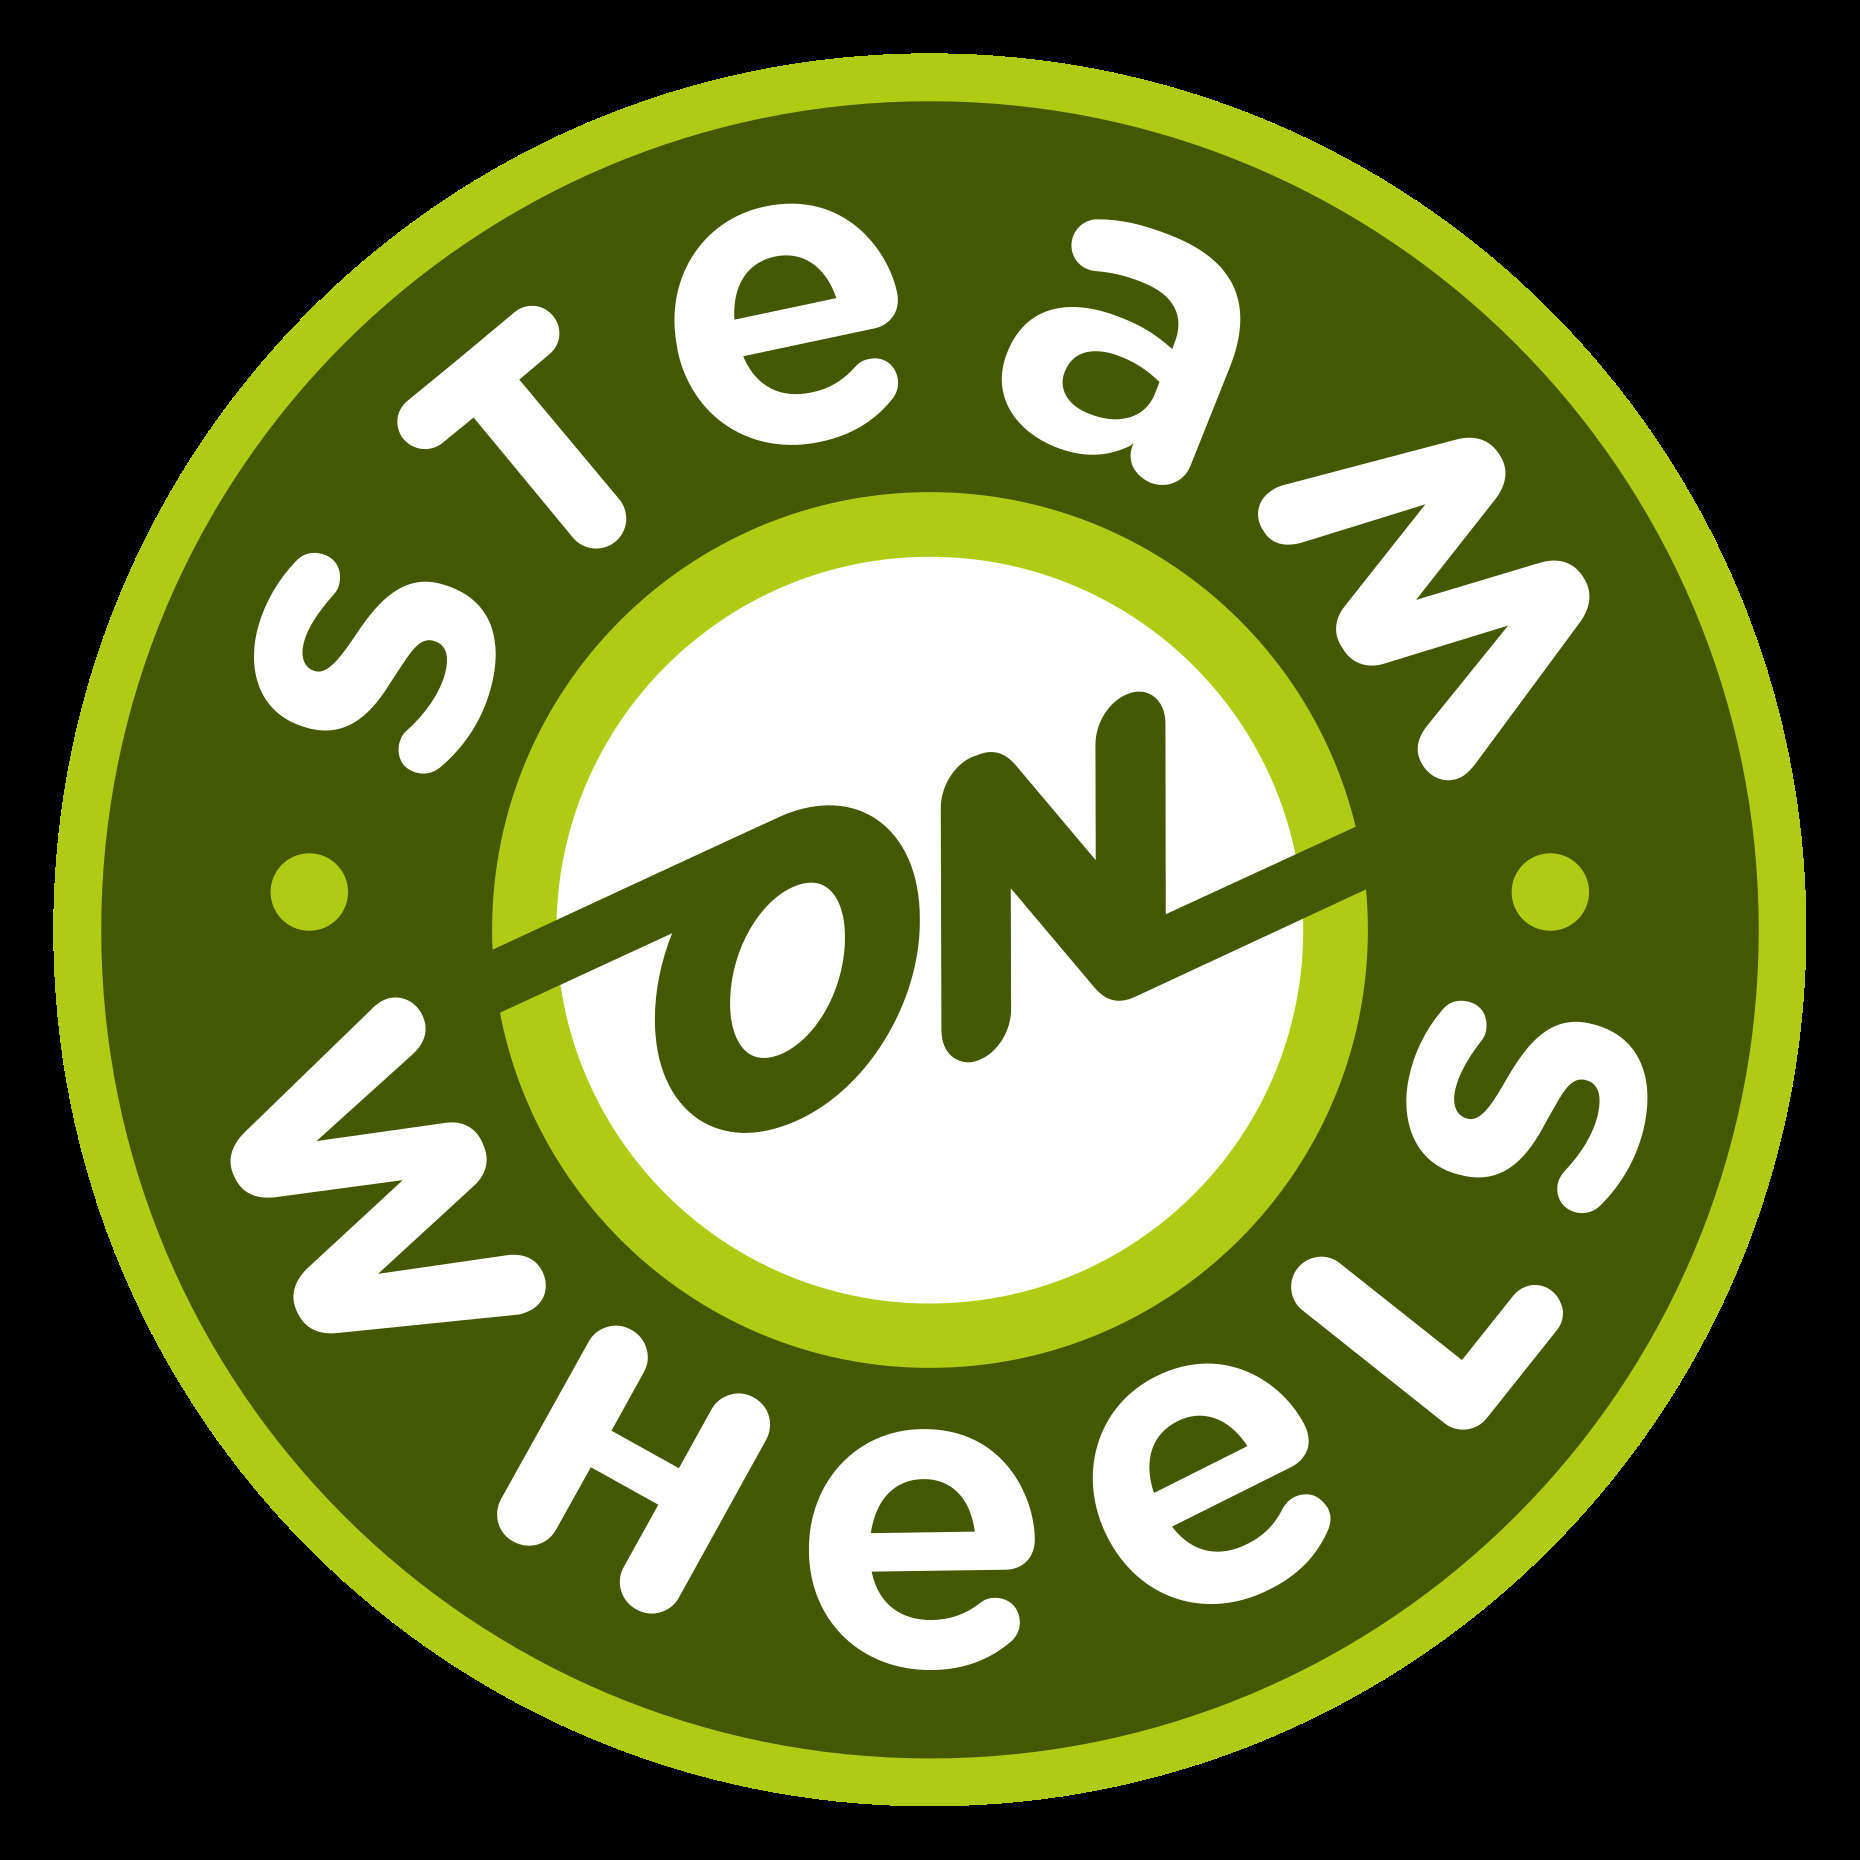 Manufacturing with STEAM on Wheels — STEAM On Wheels